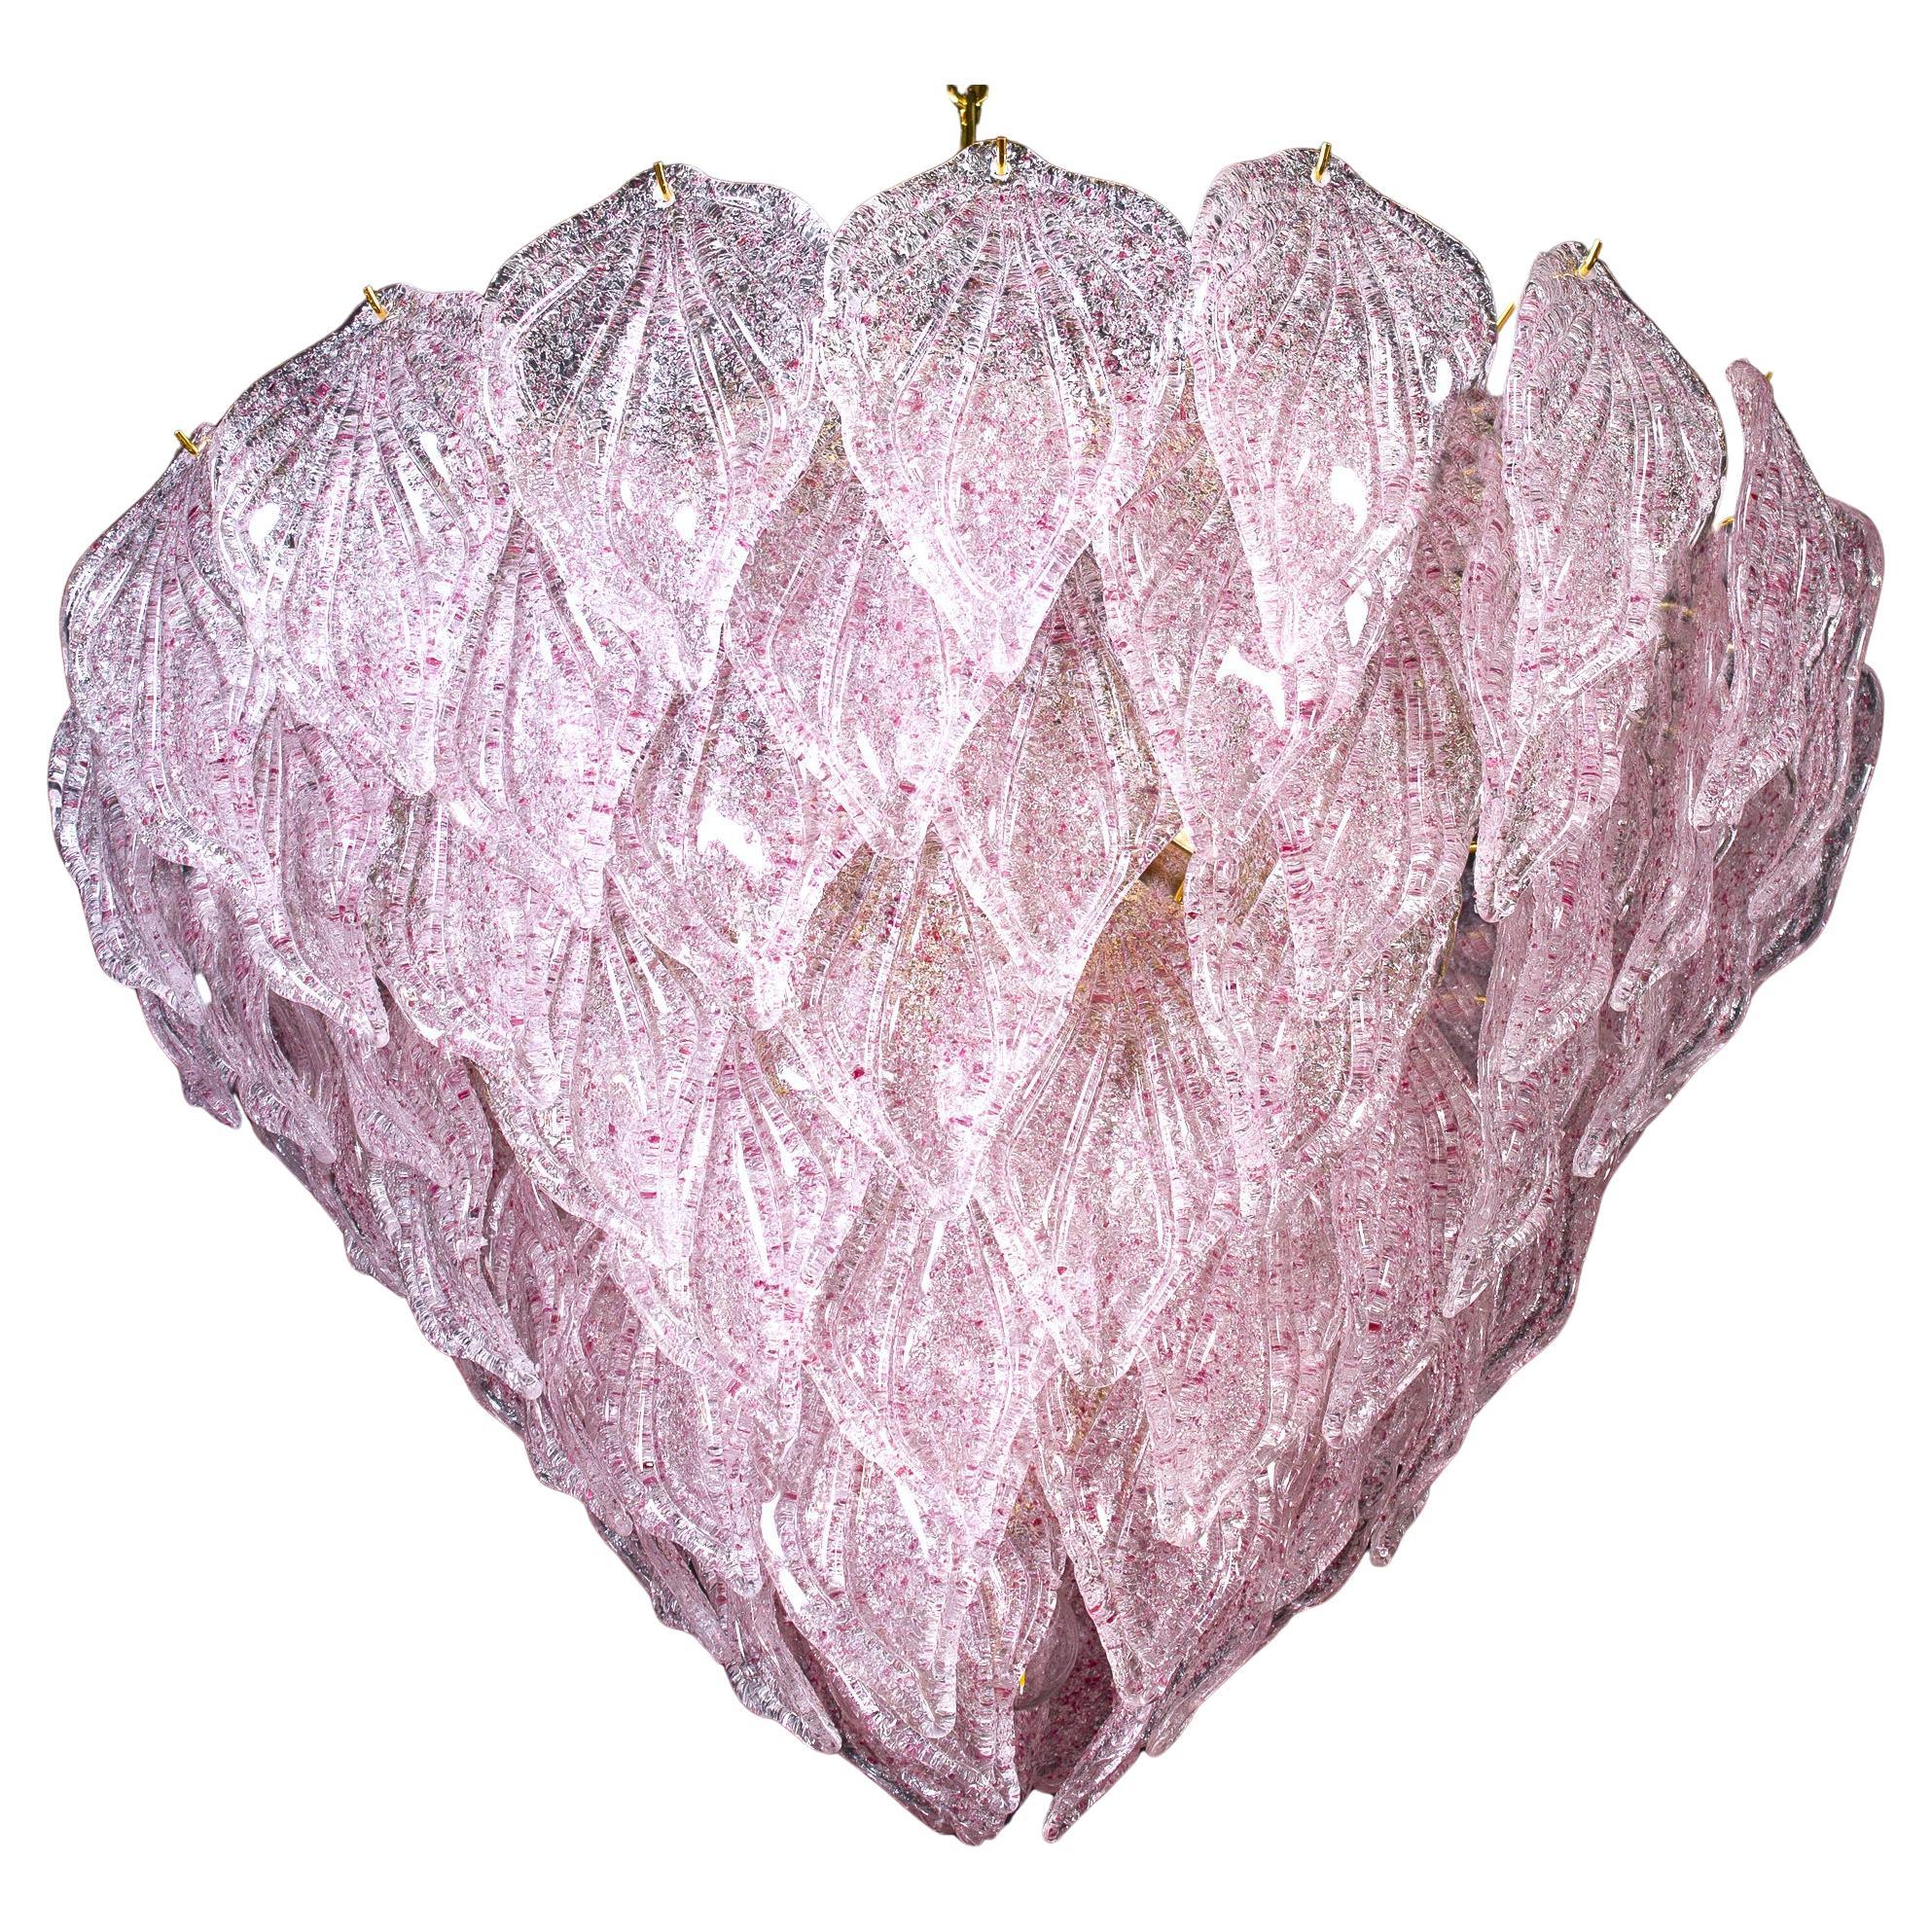  Pink Murano Glass Polar Chandelier, Italy, 1970s For Sale